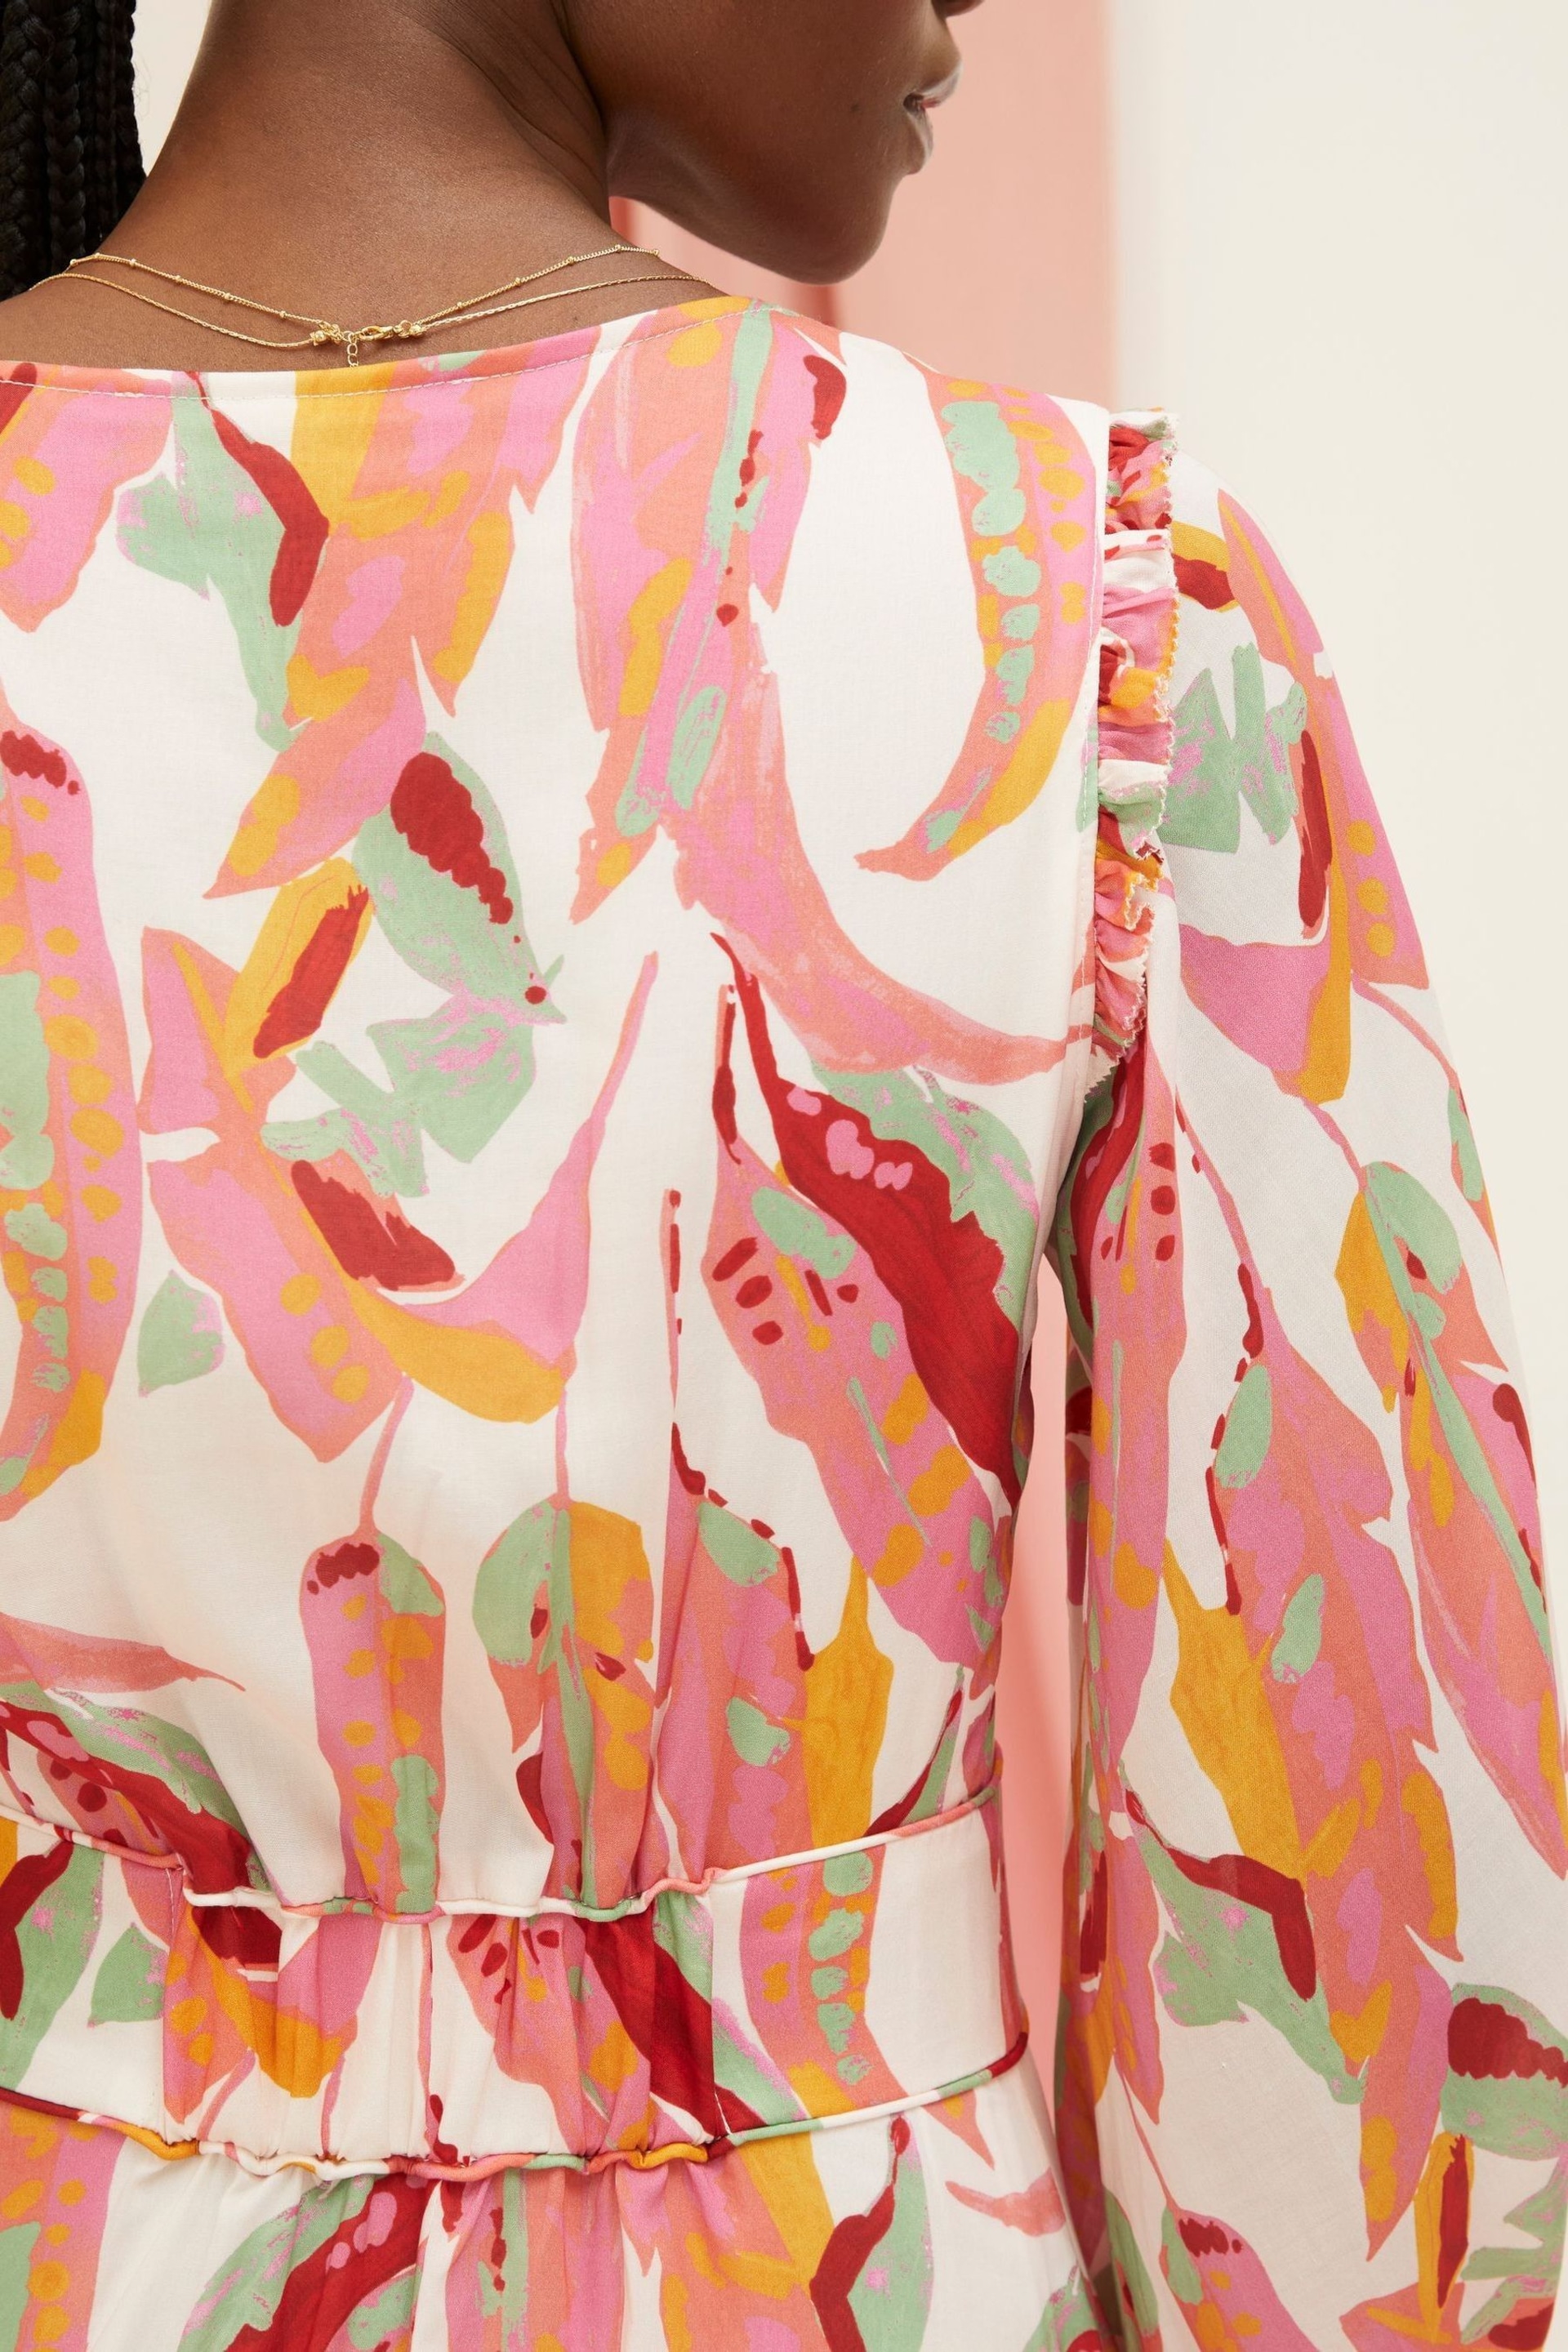 FatFace Pink Peony Painted Leaves Maxi Dress - Image 7 of 8